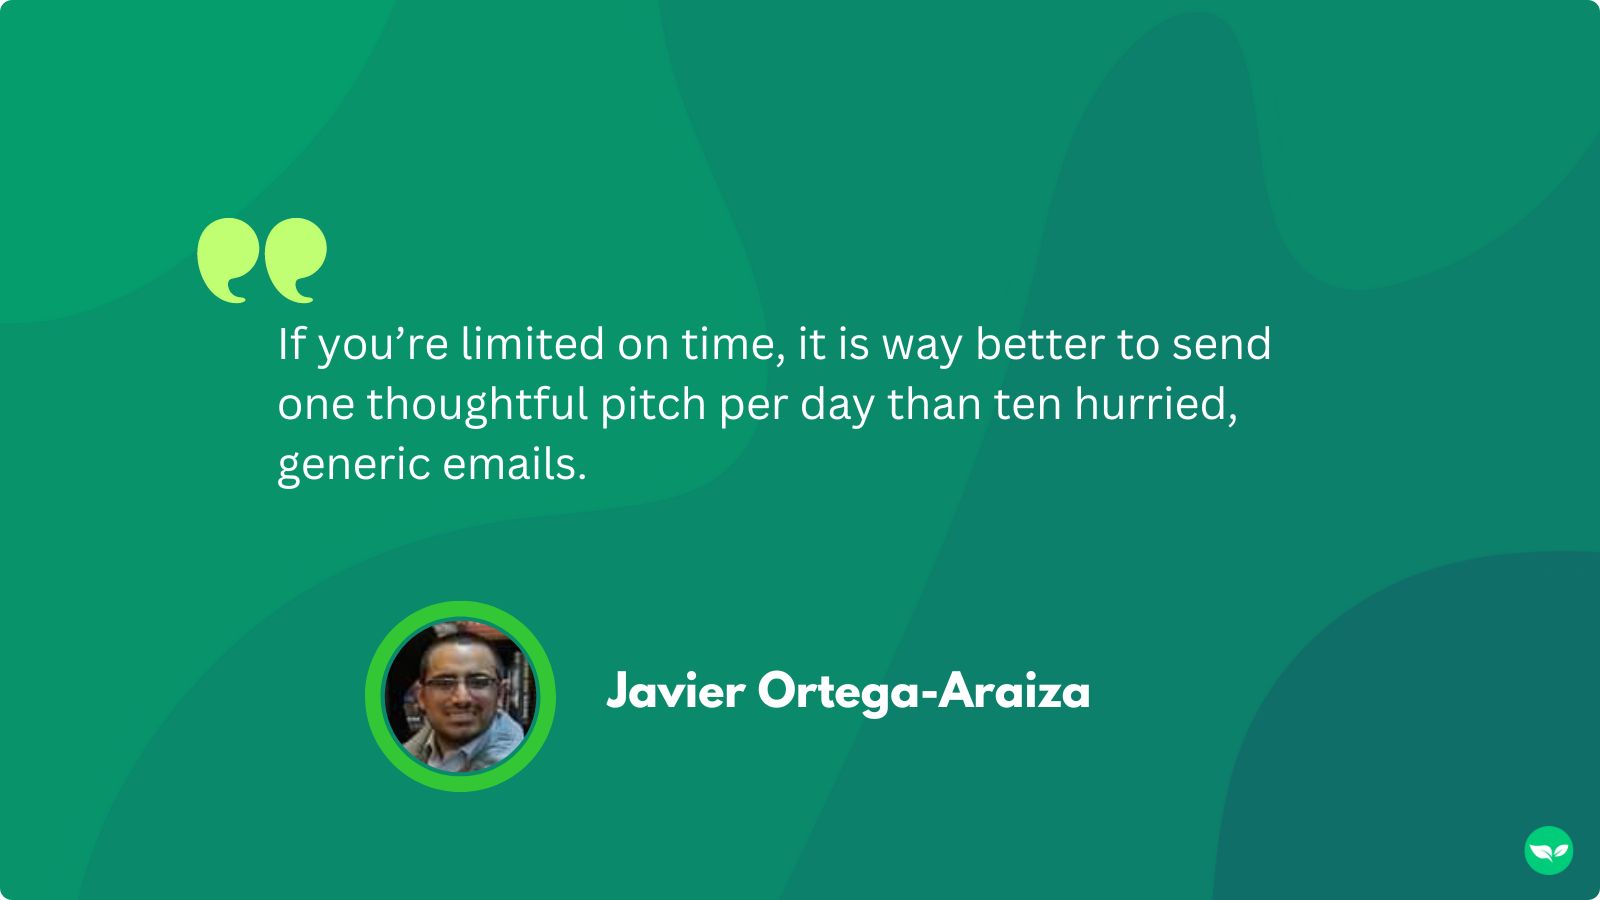 A quote from Javier, “If you’re limited on time, it is way better to send one thoughtful pitch per day than ten hurried, generic emails.”